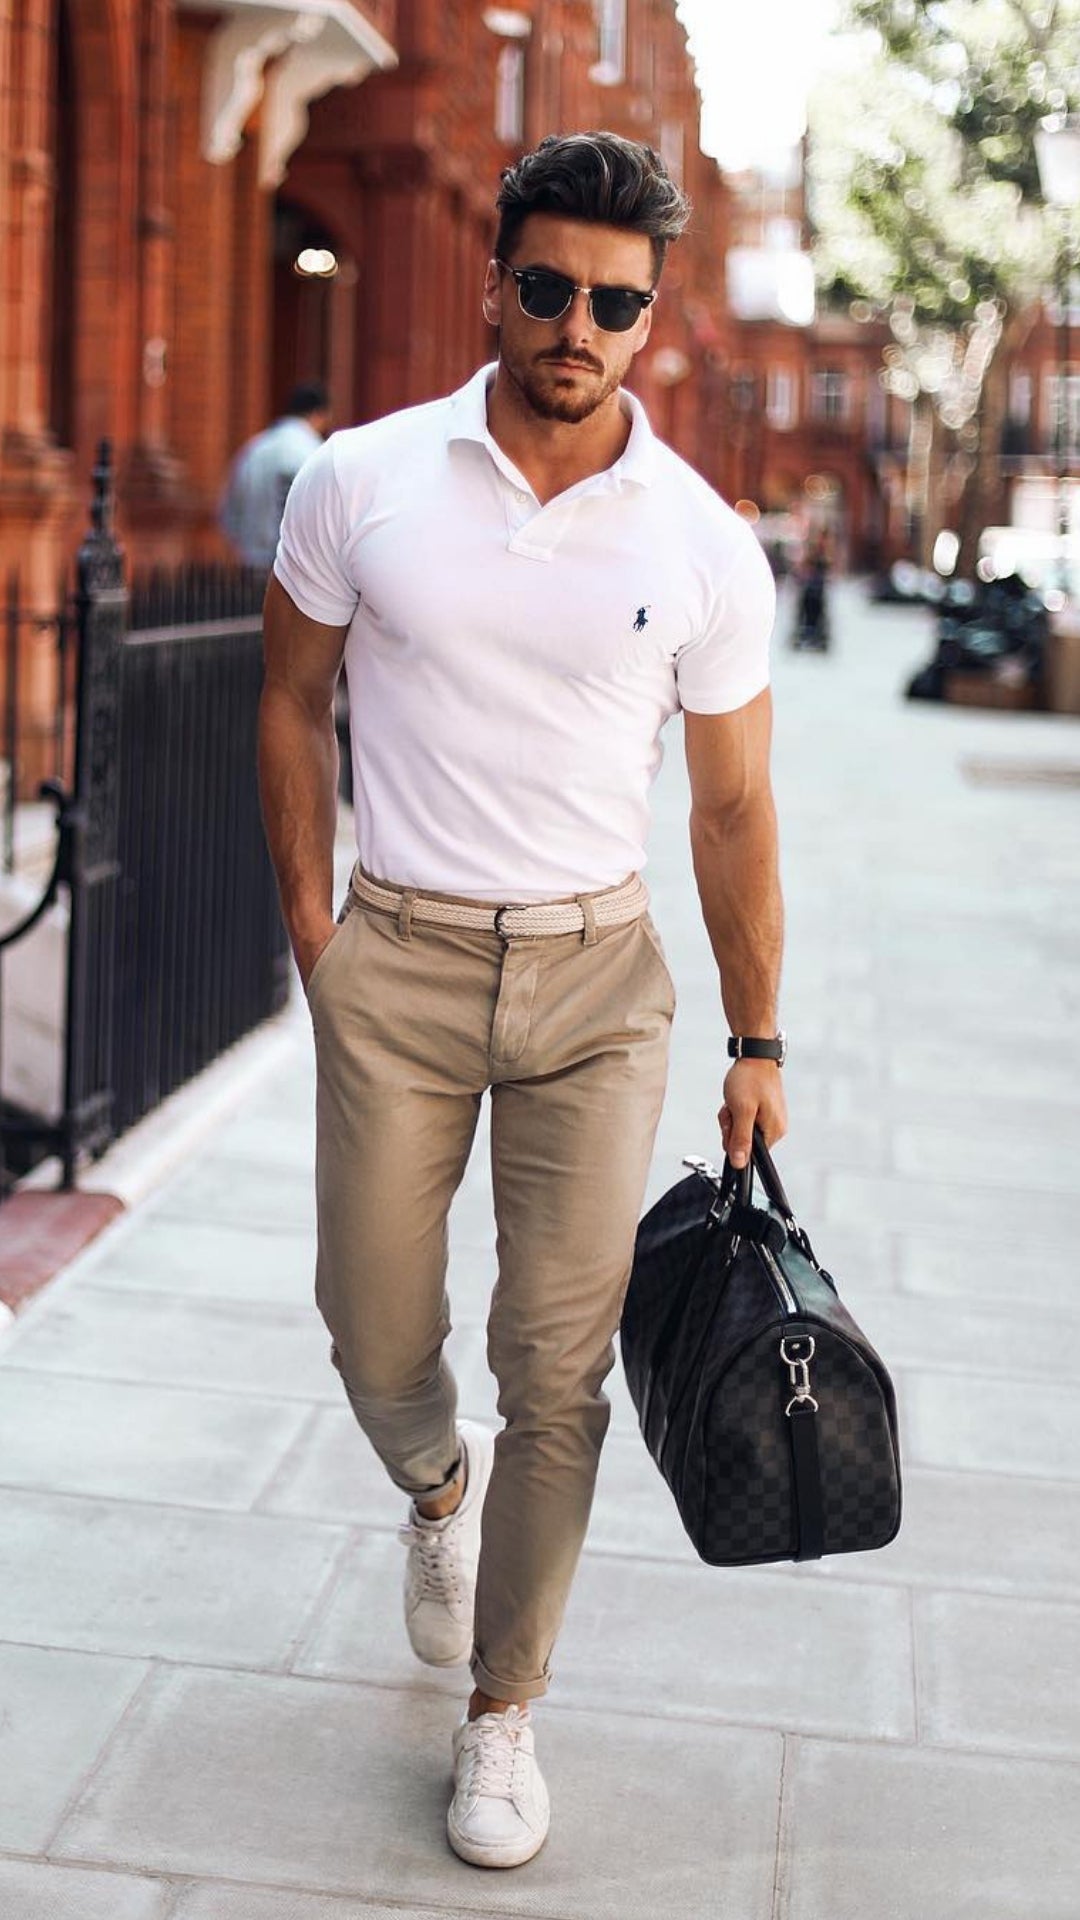 5 Simple Casual Outfits For Men #simple #casualstyle #streetstyle